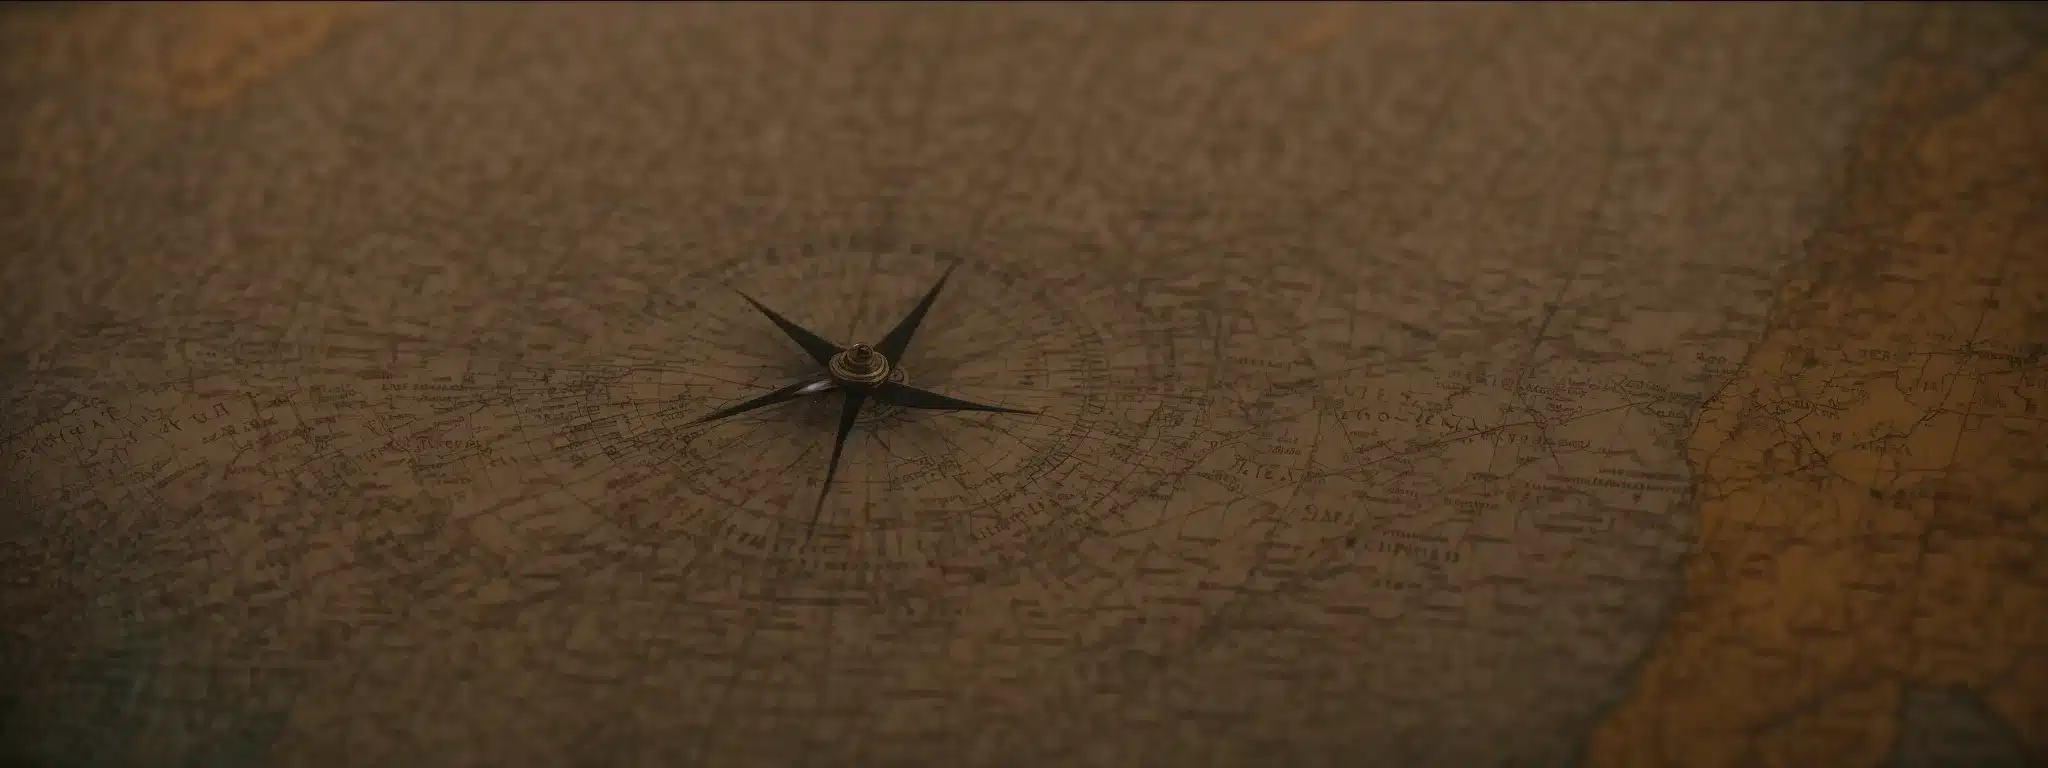 A Vintage Compass On An Antique Map, Bathed In The Warm Glow Of A Setting Sun.